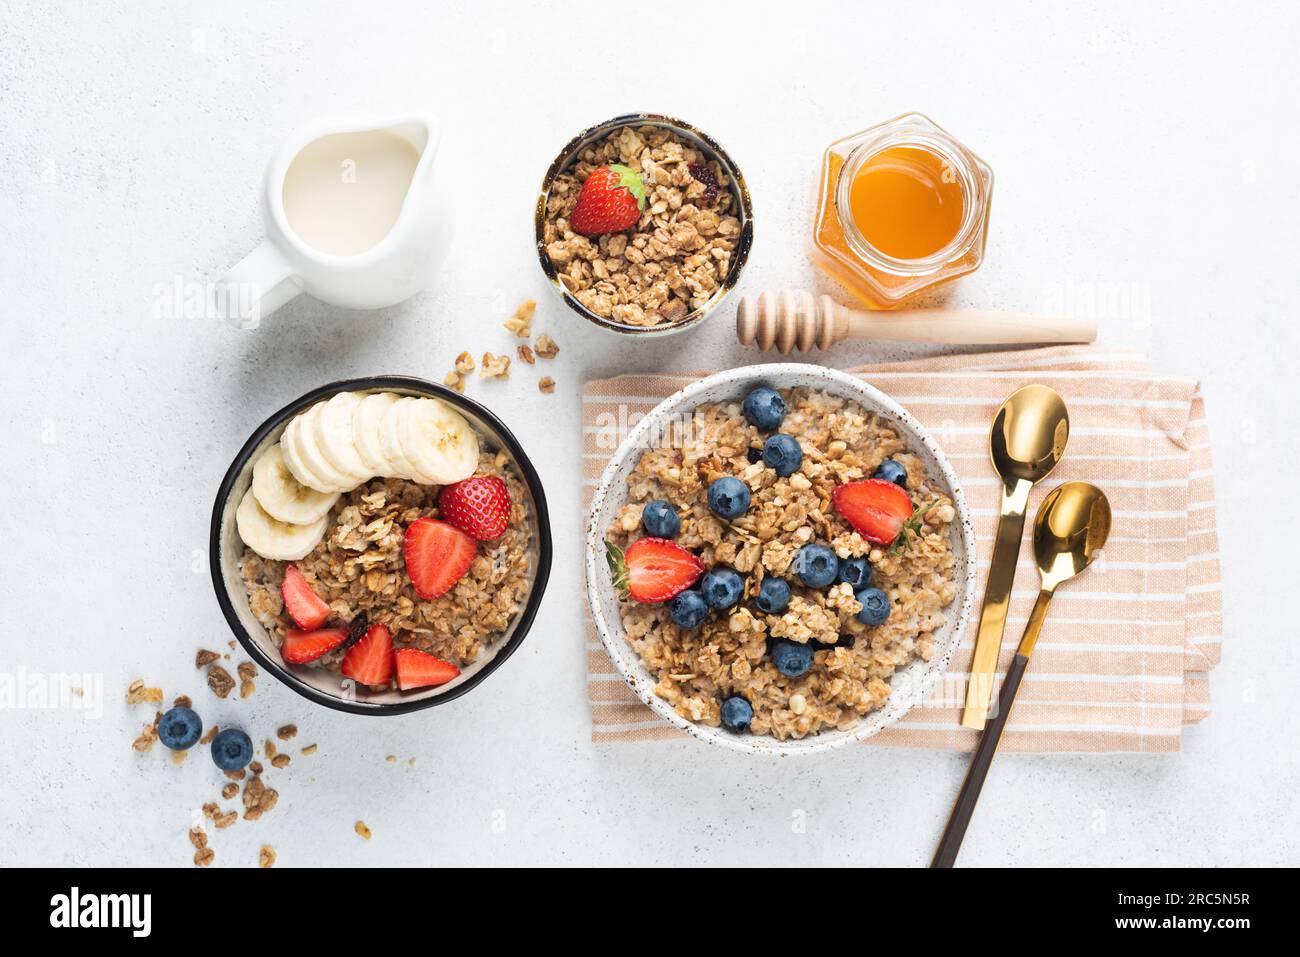 Granola with berries, banana and almond milk on a table, top view. Flat lay composition Stock Photo